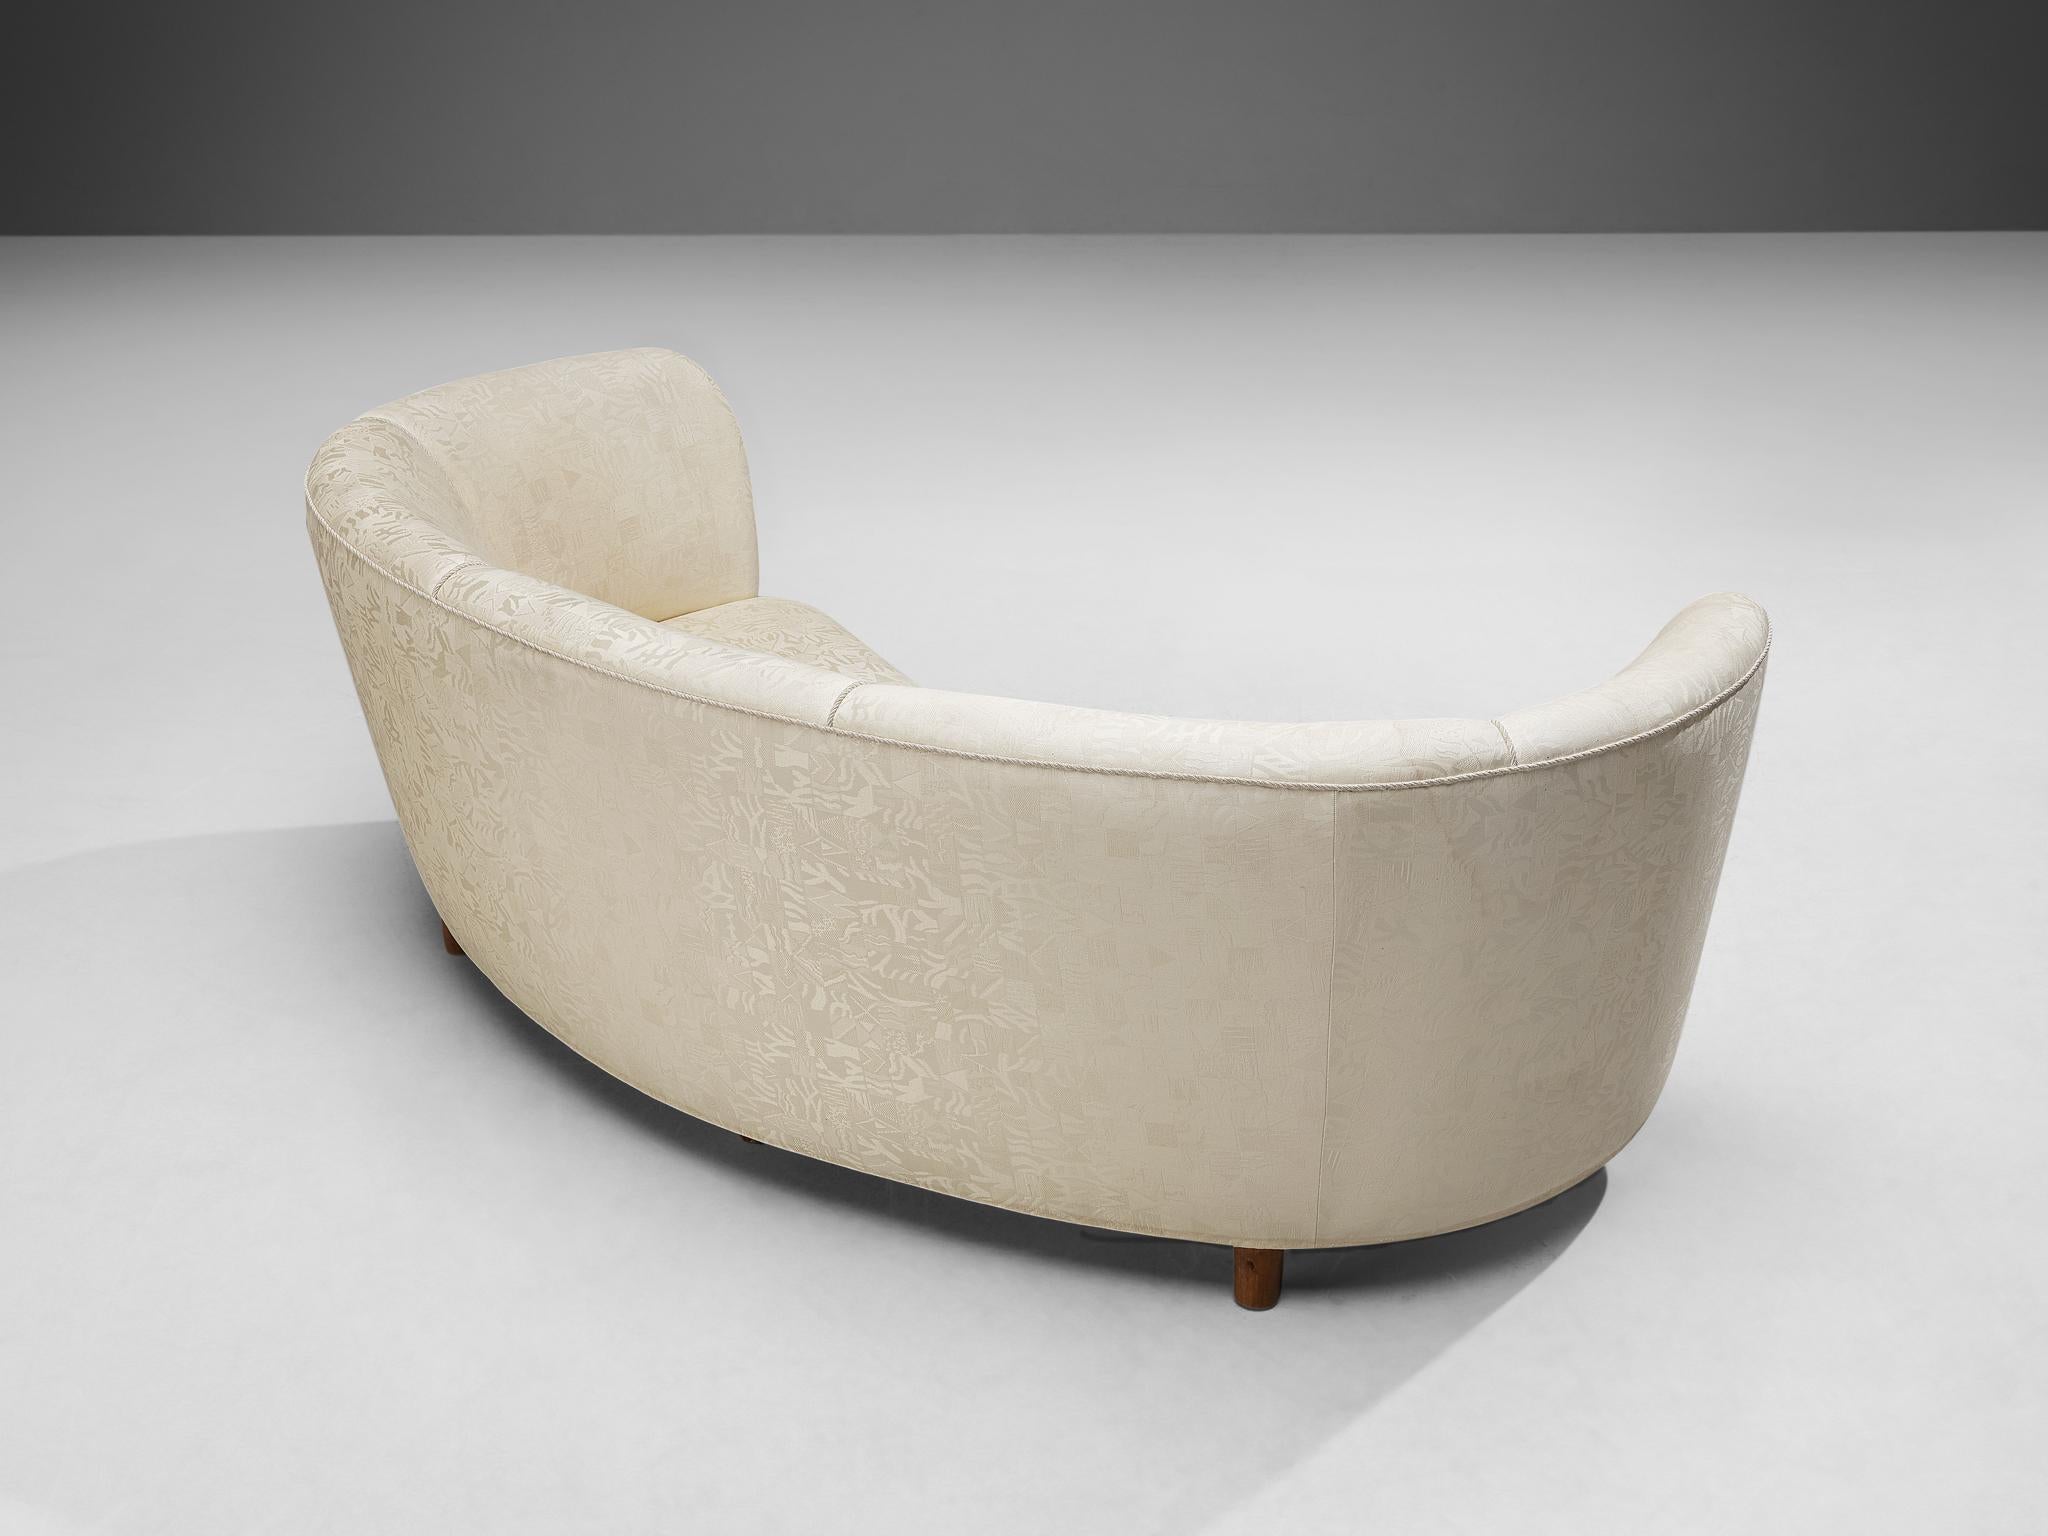 Danish Banana Sofa in Patterned Off White Upholstery  For Sale 2